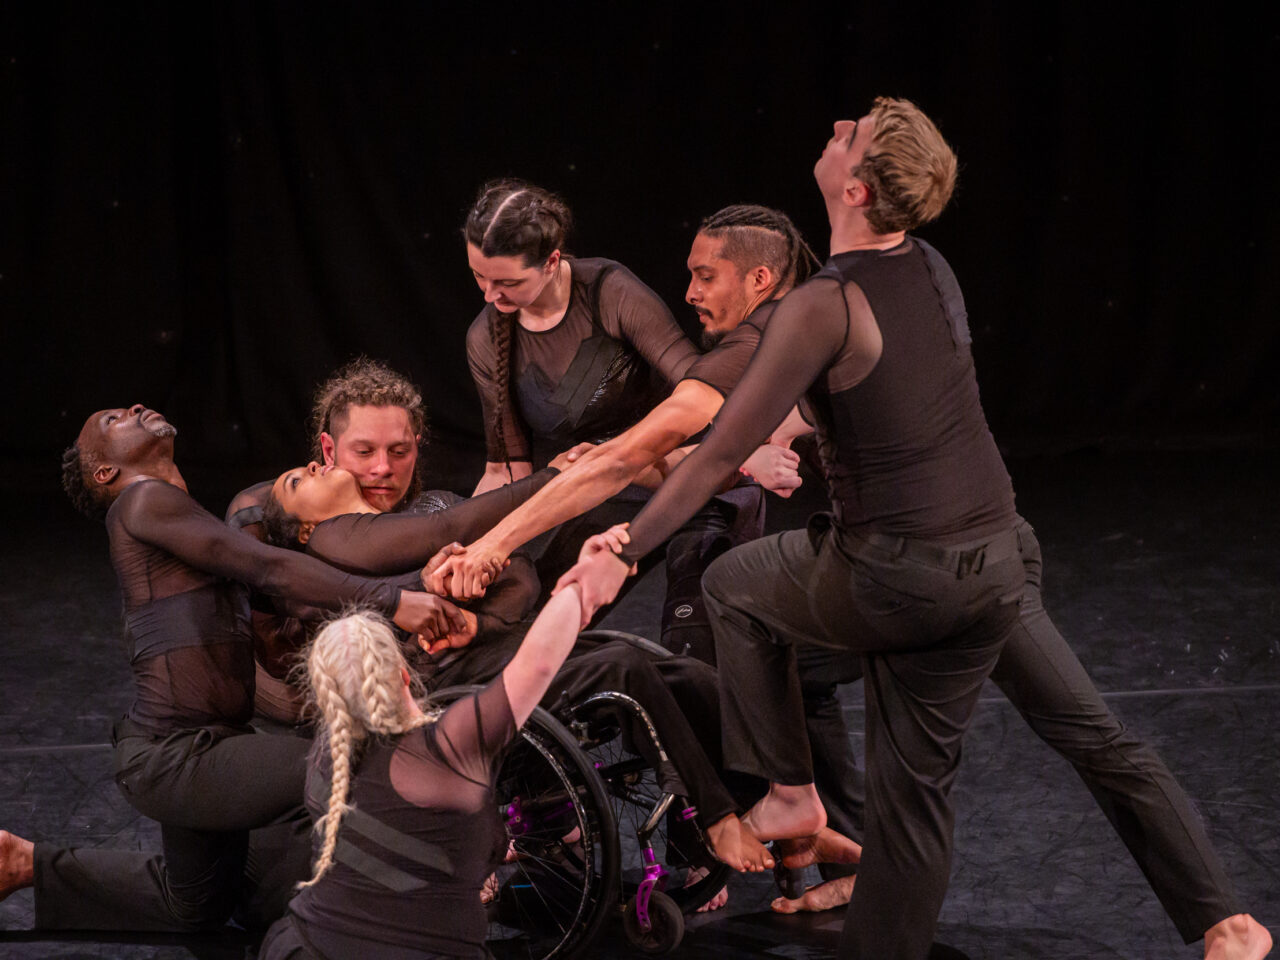 All seven dancers are connected holding hands. Arms are overlapped, some are stood up, some on the floor and in-between, all looking different ways. The wheelchair user is in the centre falling backwards into into another dancer.